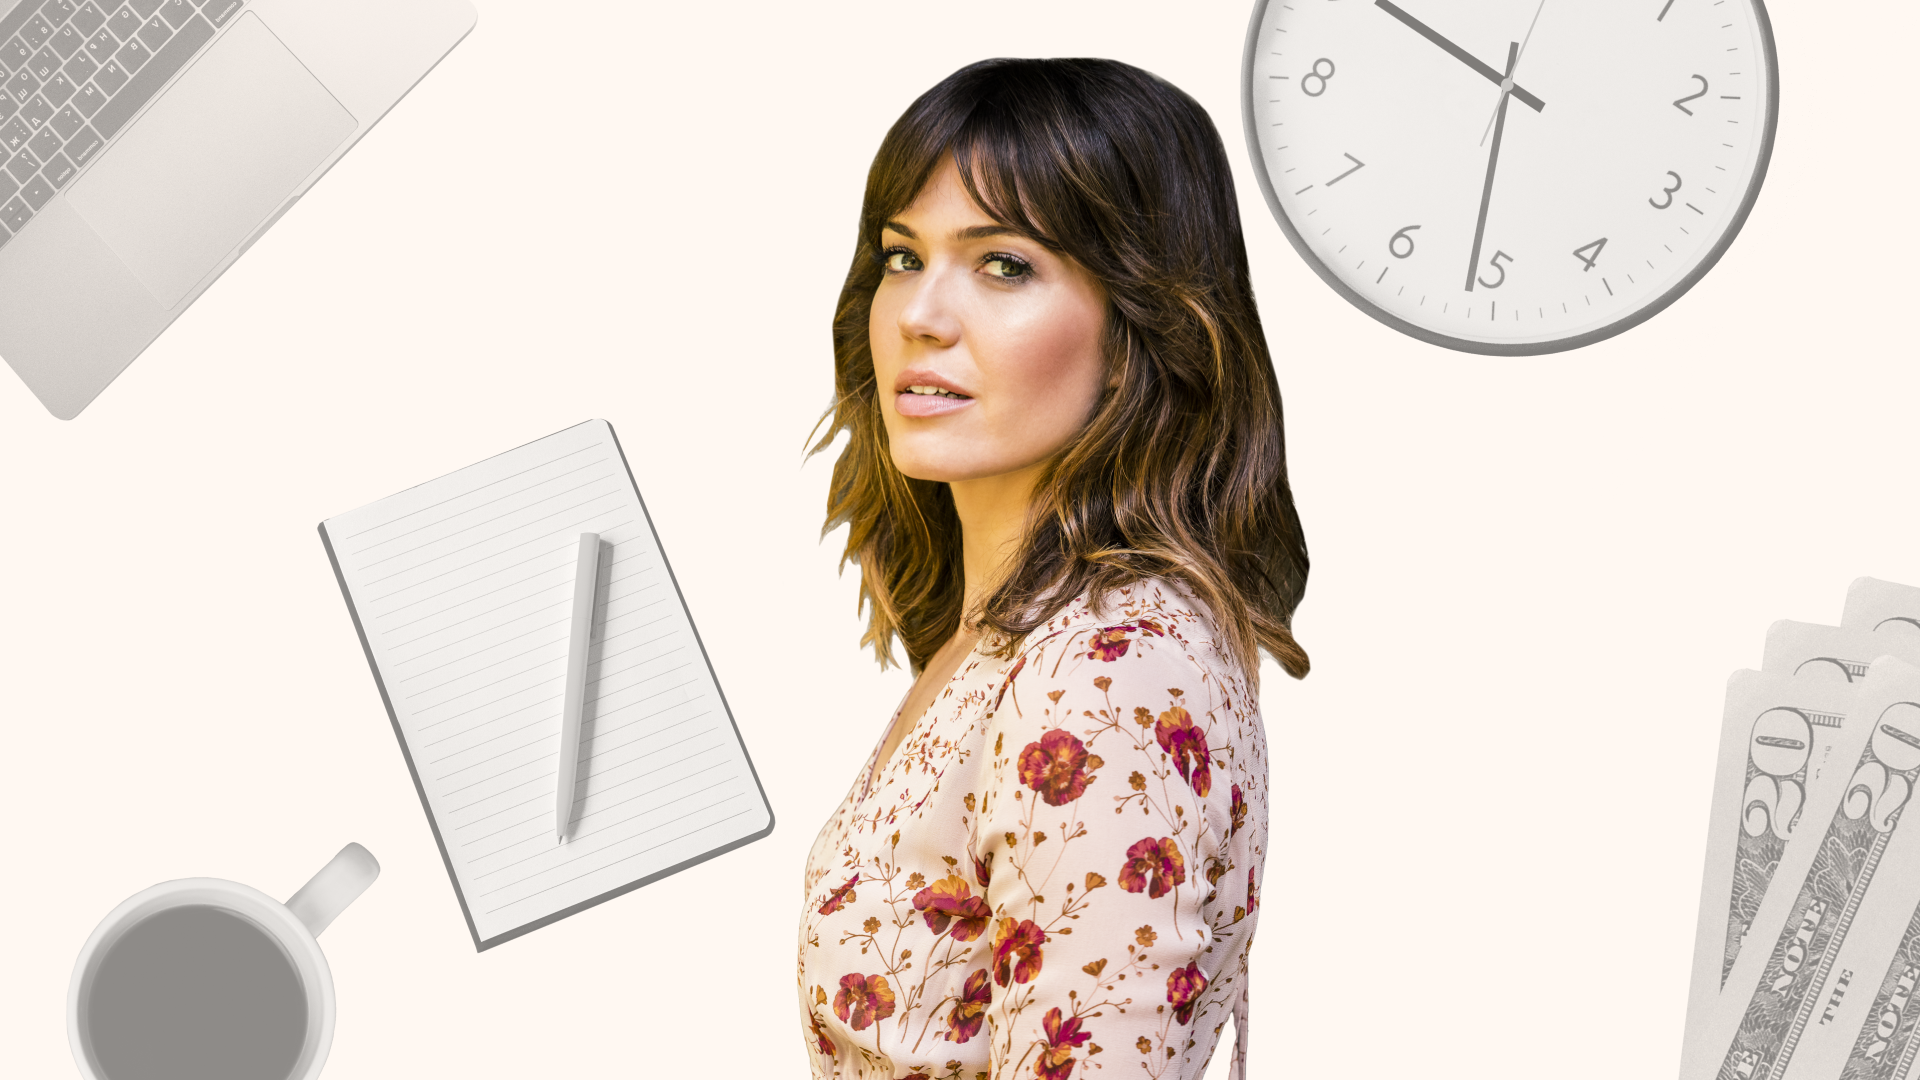 Mandy Moore Texting With Promo Image 